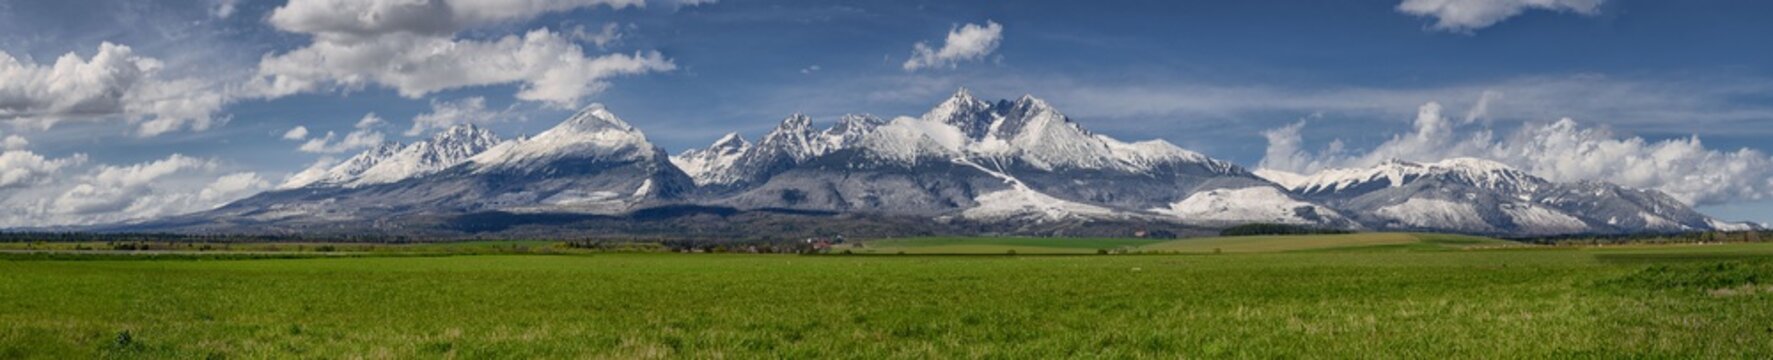 Extra wide panorama of High Tatra mounatins with main ridge during April with snowy hills and blue sky with clouds, Vysoke Tatry, Slovakia